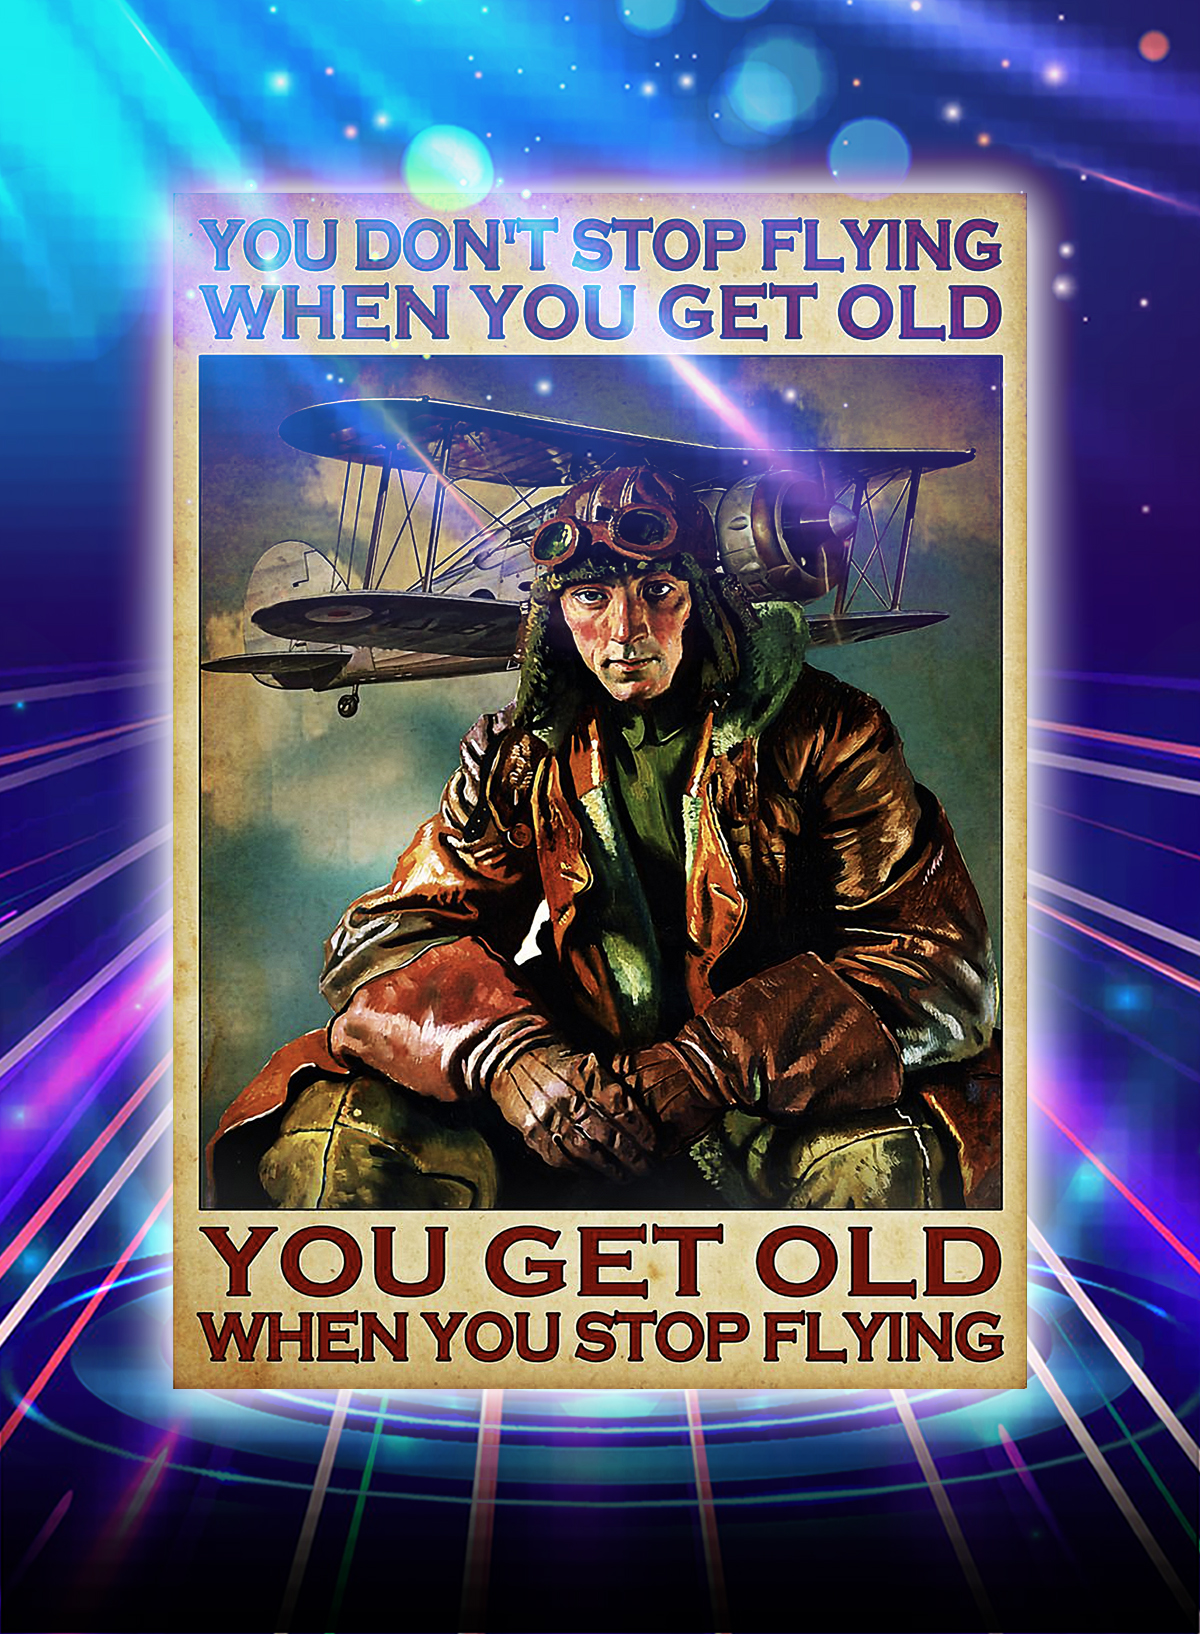 YOU DON'T STOP FLYING WHEN YOU GET OLD PILOT POSTER - A4